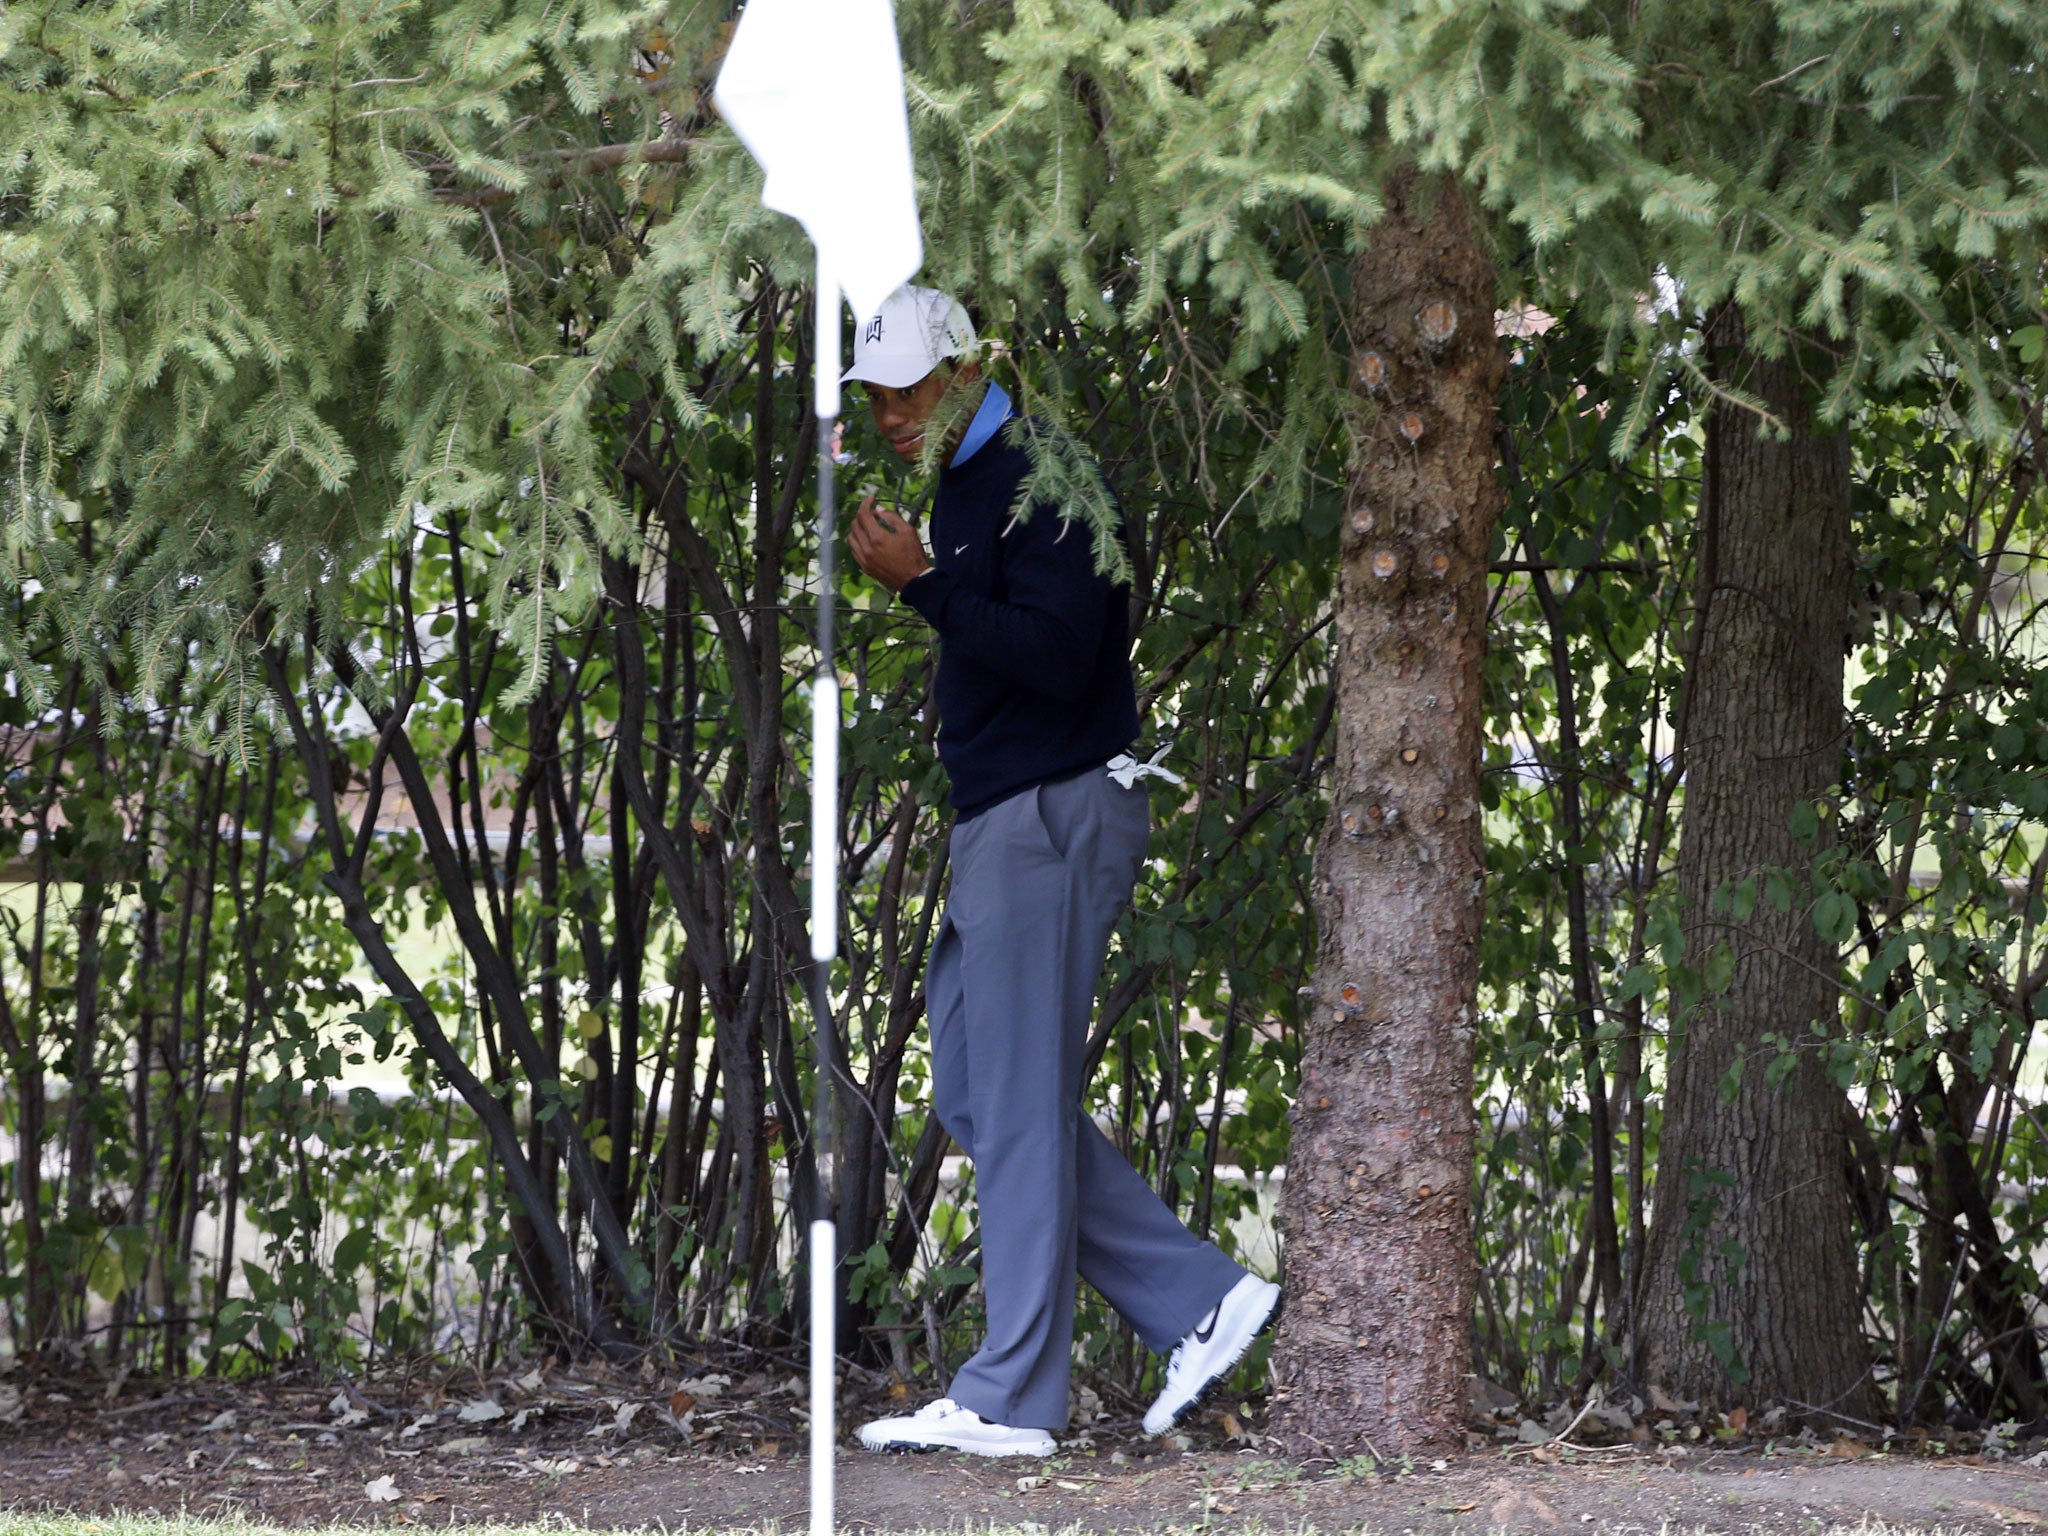 Tiger Woods in the trees where his ball strayed and moving the twig that caused it to move